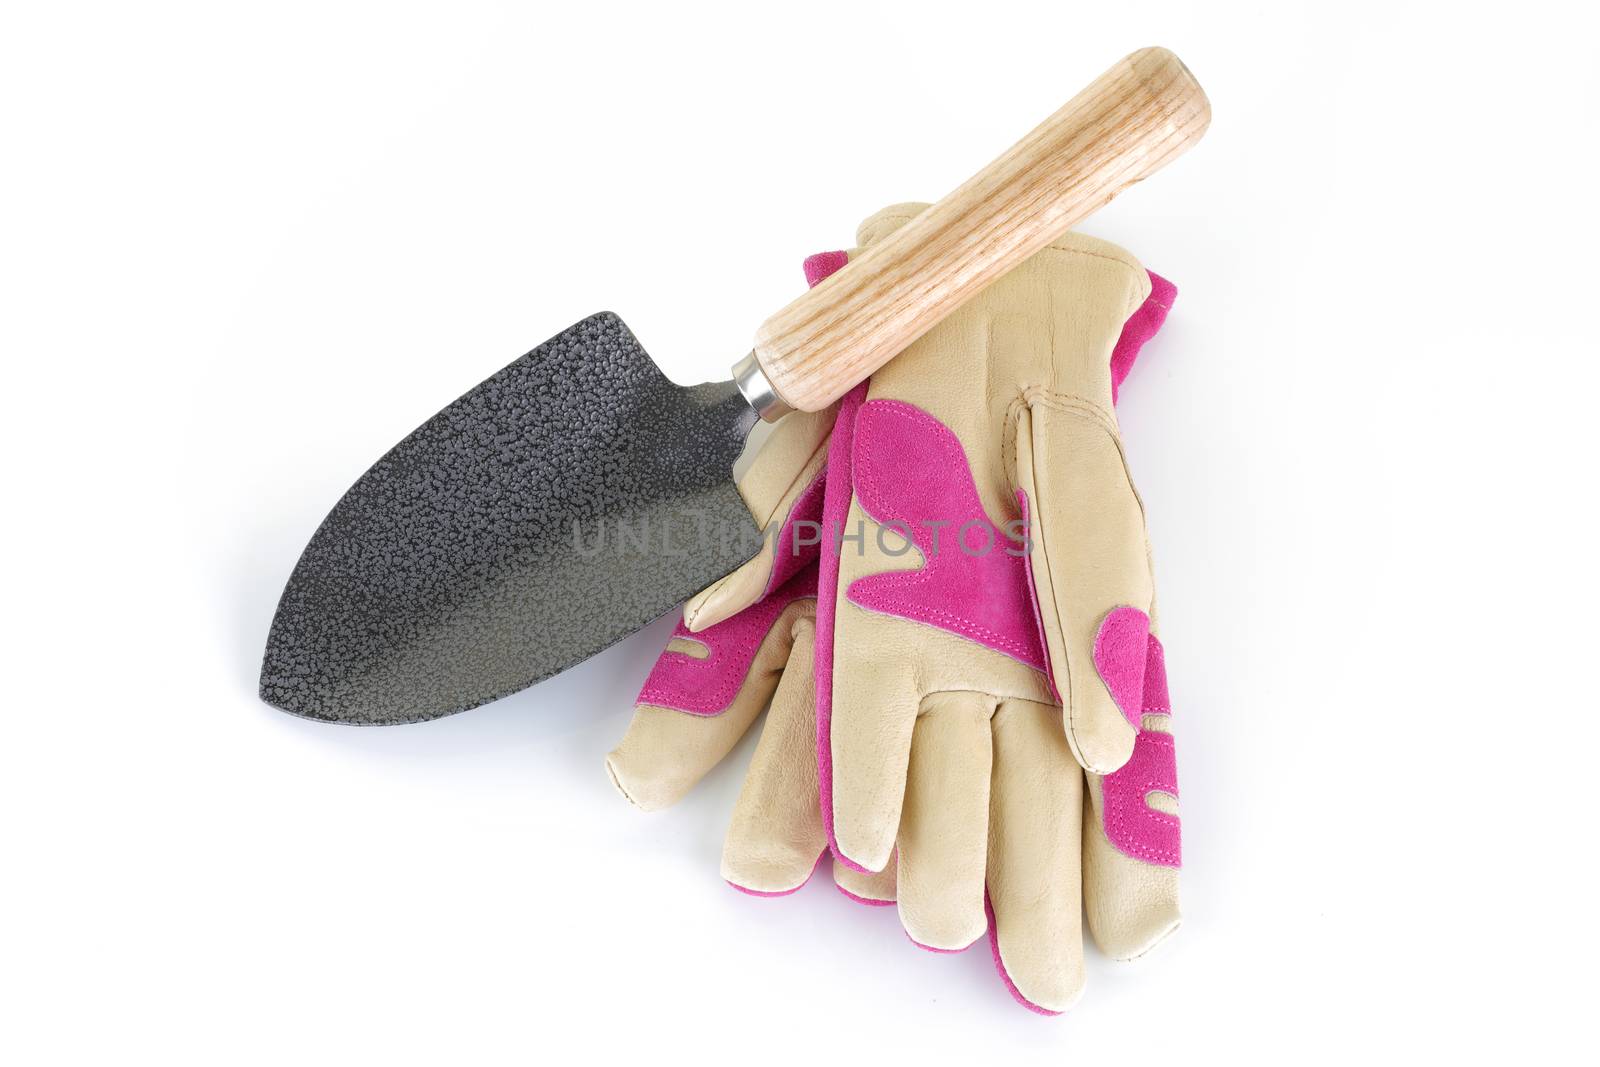 A pair of ladies gloves and trowel for the garden